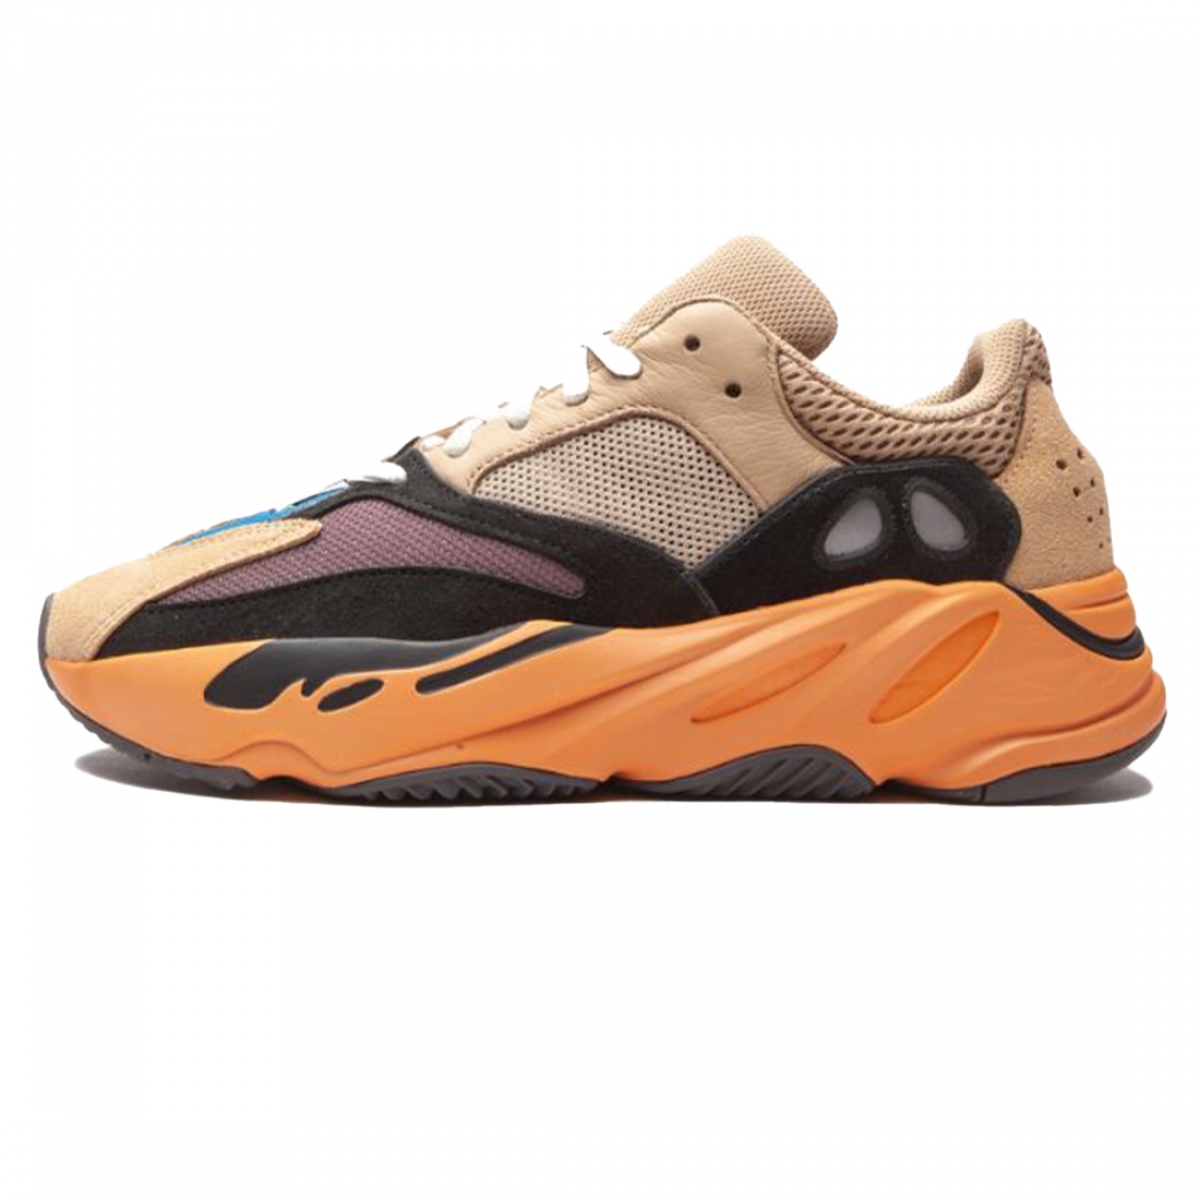 Yeezy 700 “Enflame Amber” – PK-Shoes